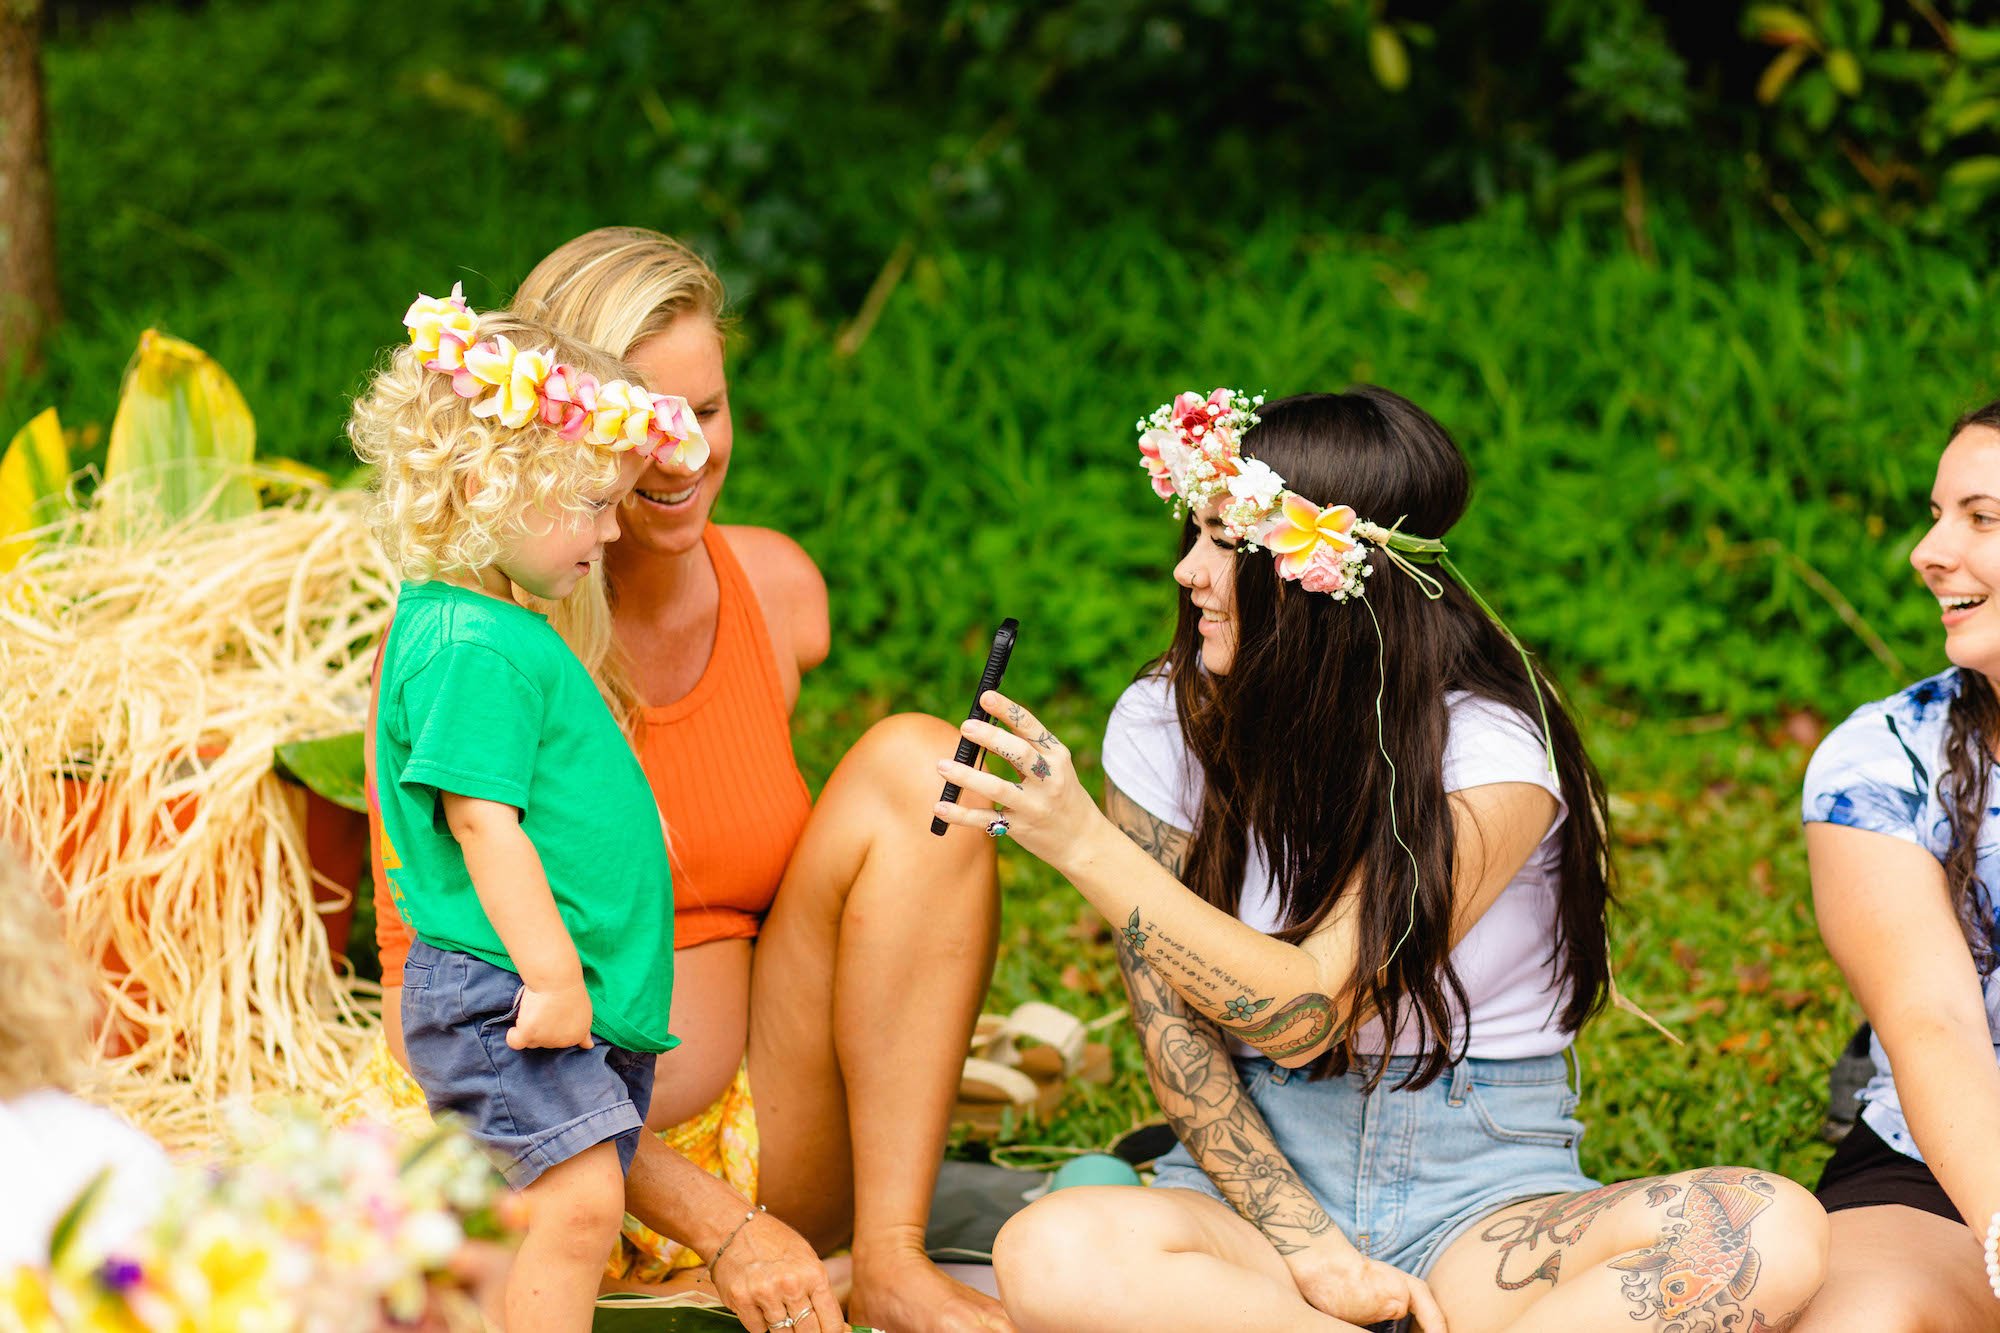 Retreat attendee showing Bethany Hamilton and her son Micah something on her phone while wearing her lei po'o